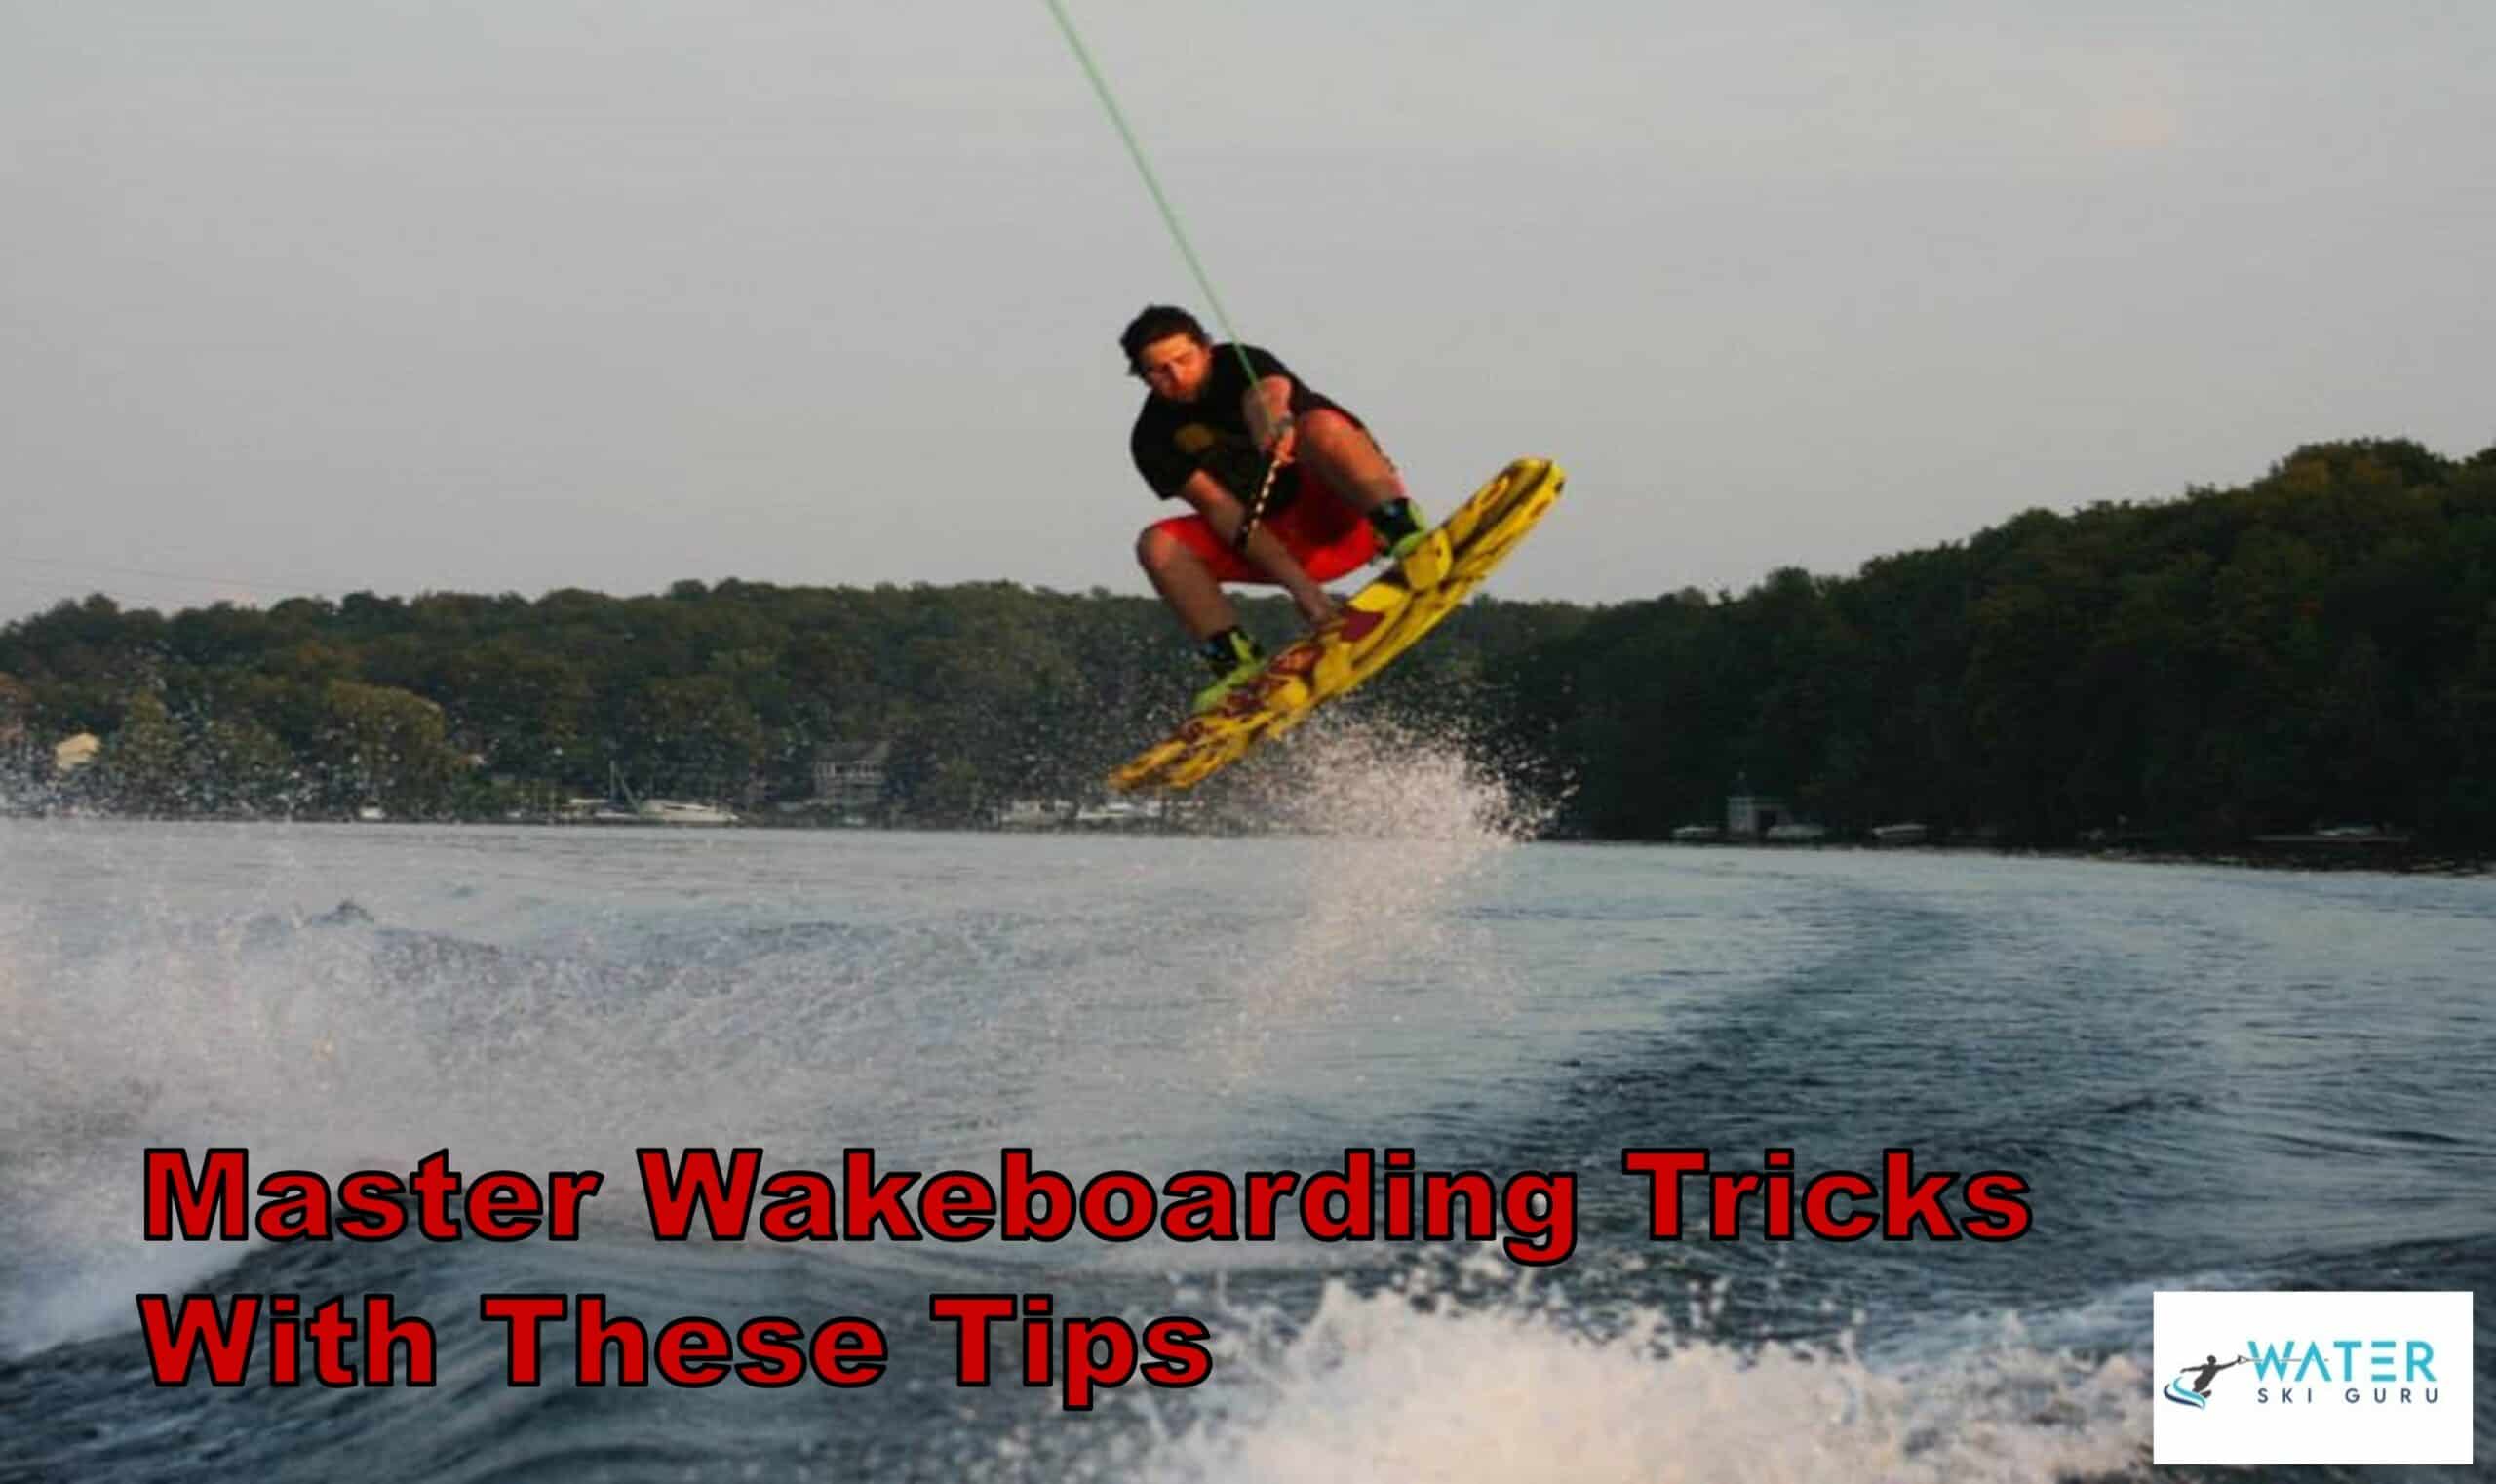 Master Wakeboarding Tricks With These Tips